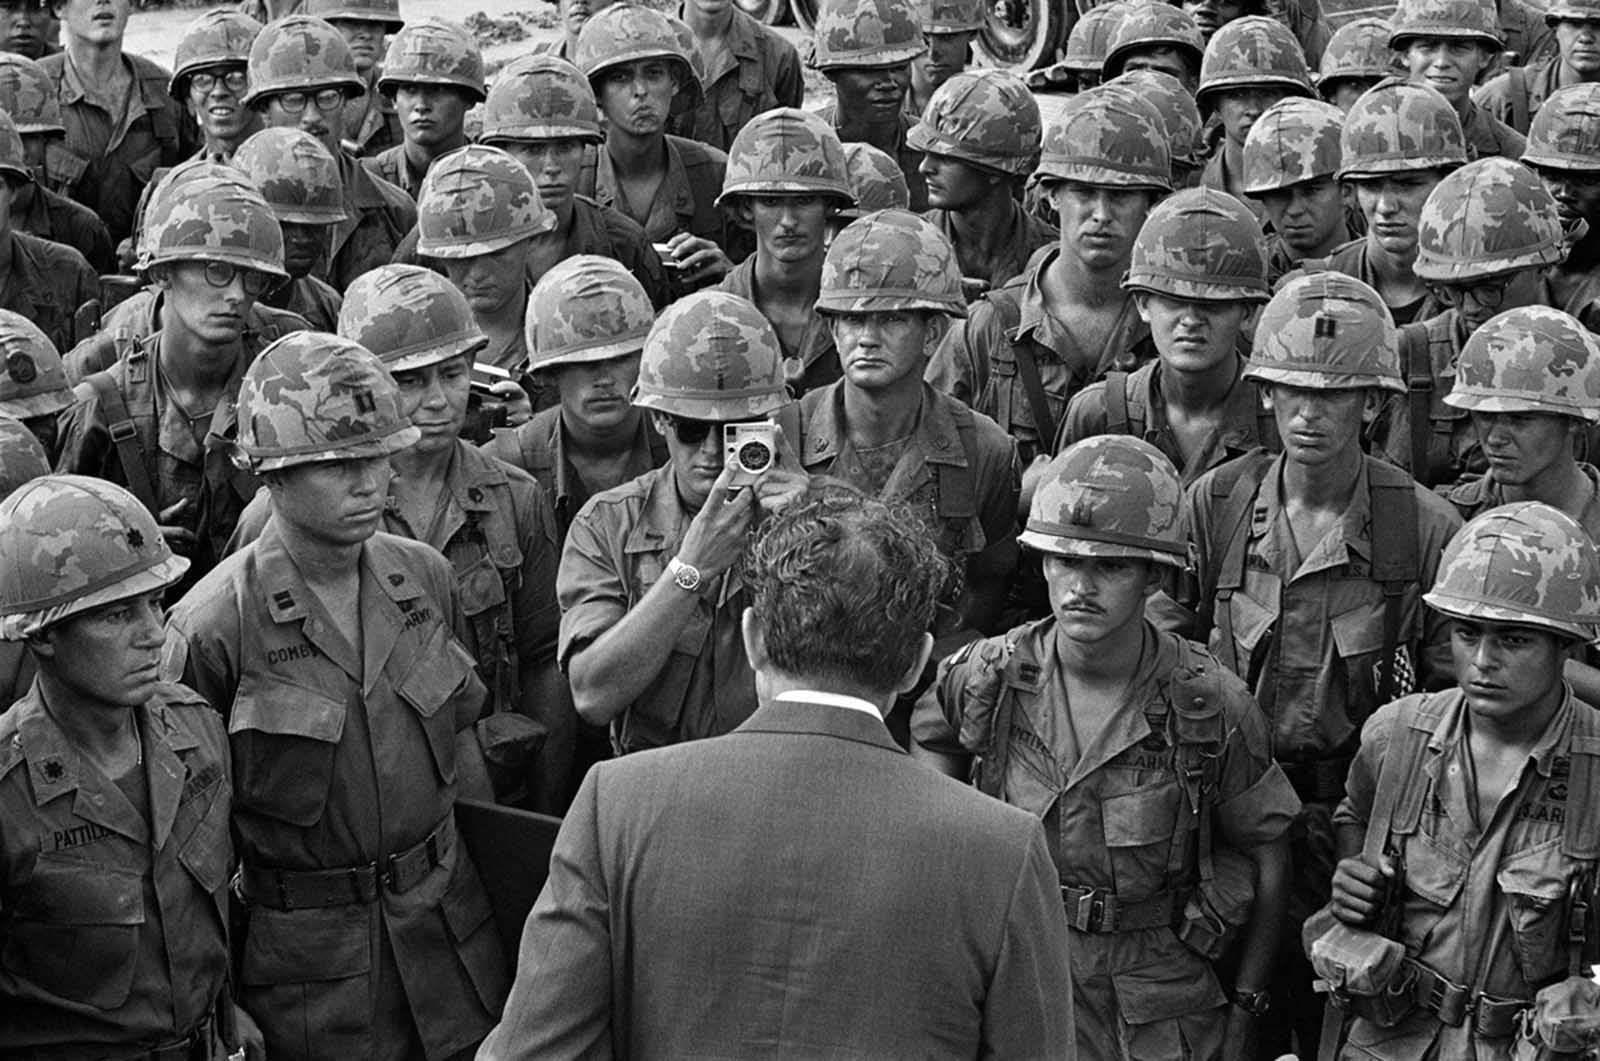 A GI gets a closeup photo as President Nixon meets with troops of the 1st Infantry Division at Di An, 12 miles northeast of Saigon, on his eighth visit to South Vietnam and his first as president, on July 30, 1969.